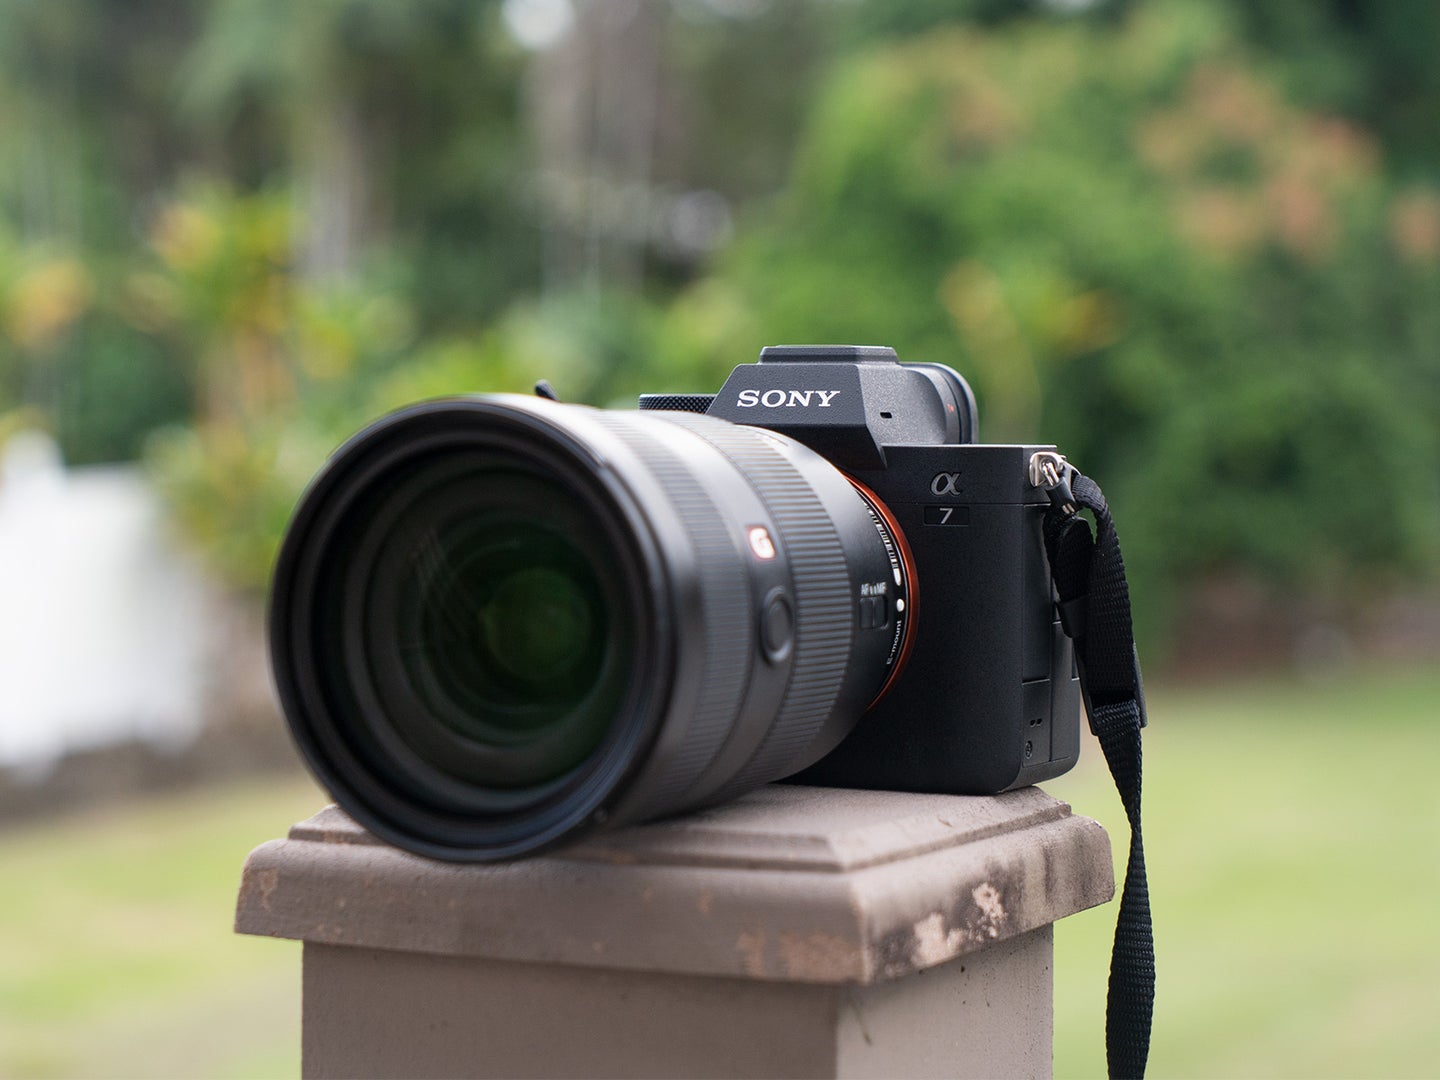 Sony A6700 vs A7 IV - The 10 Main Differences - Mirrorless Comparison